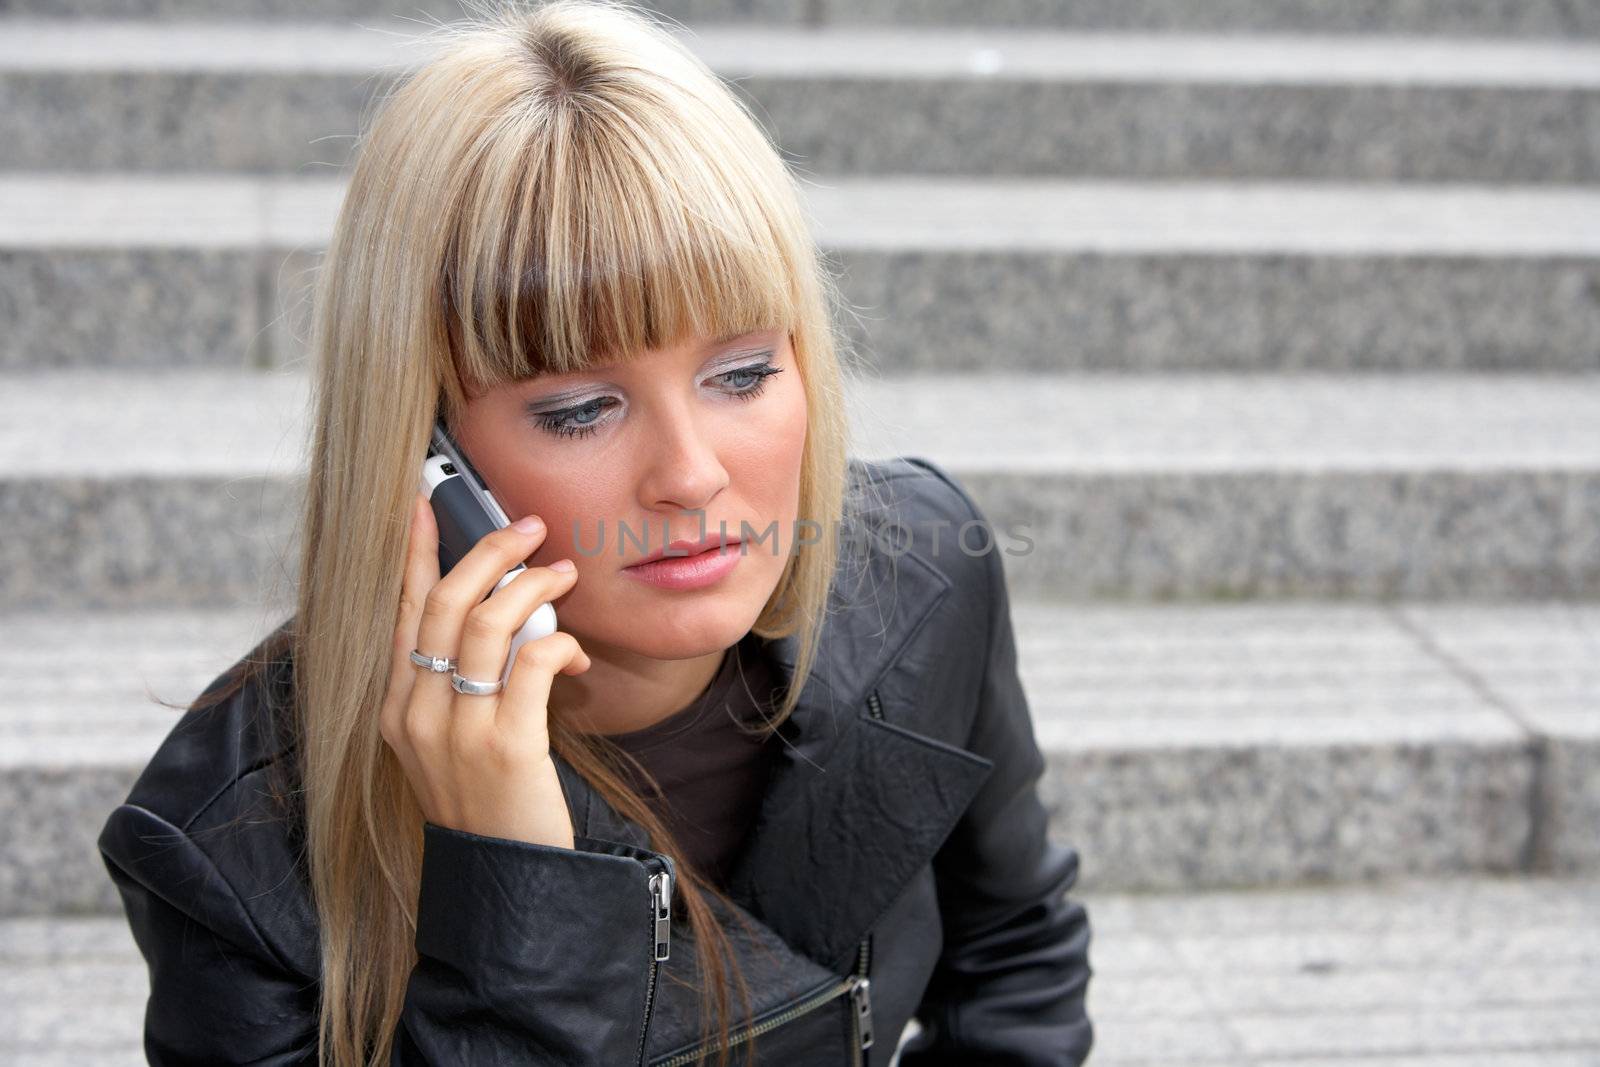 Young woman using mobile phone, looking down